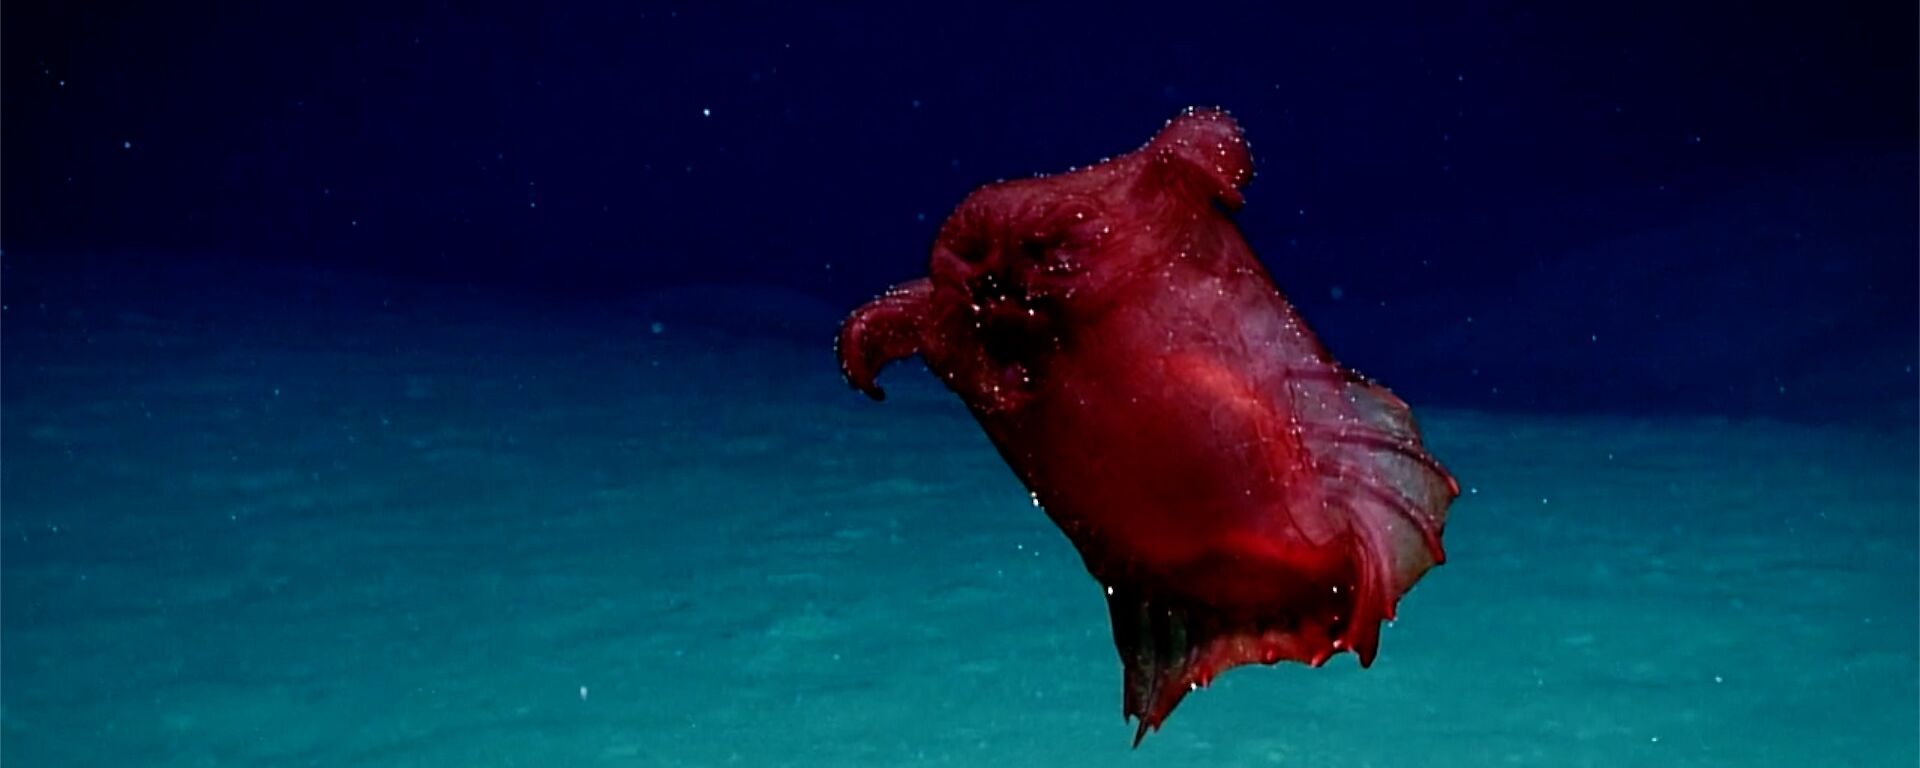 A bulbous, red marine creature with a webbed swimming fin resembling a collar.